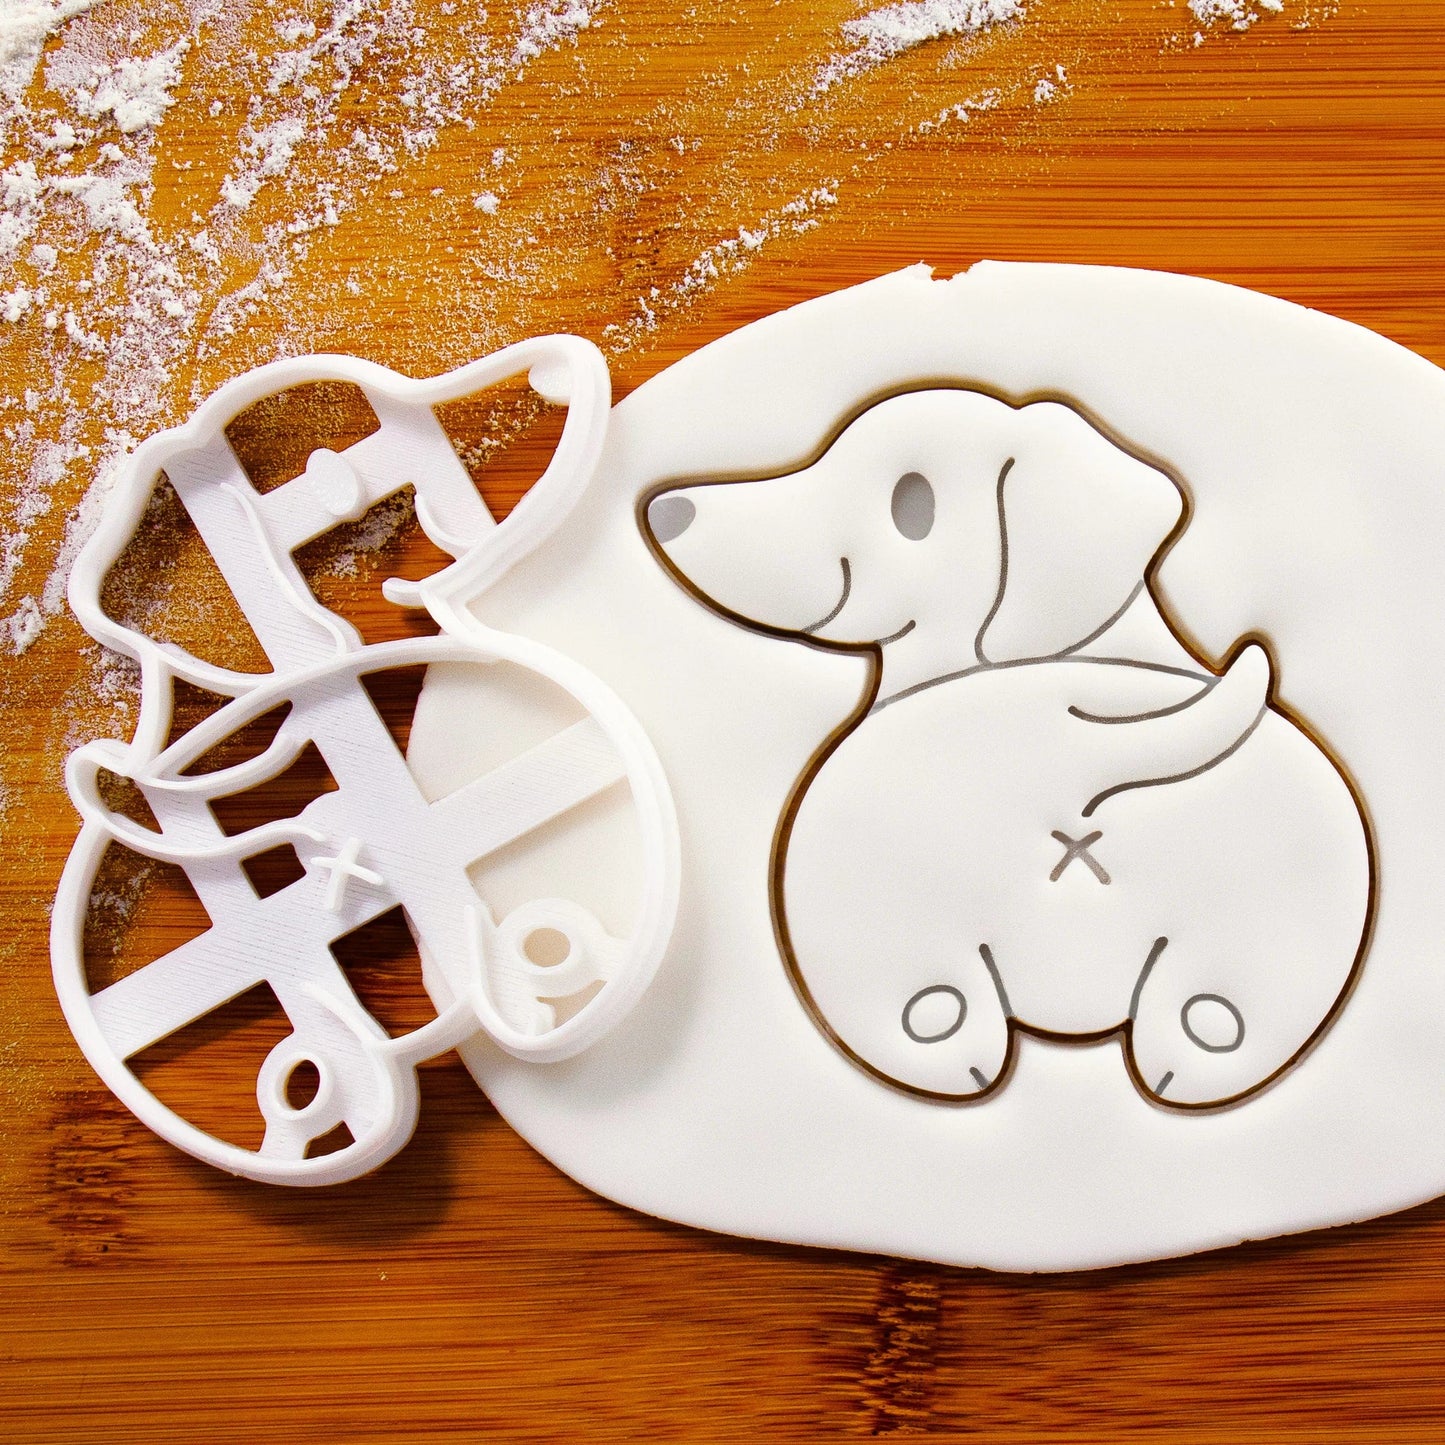 Smiling Dachshund Cookie Cutter The Doxie World